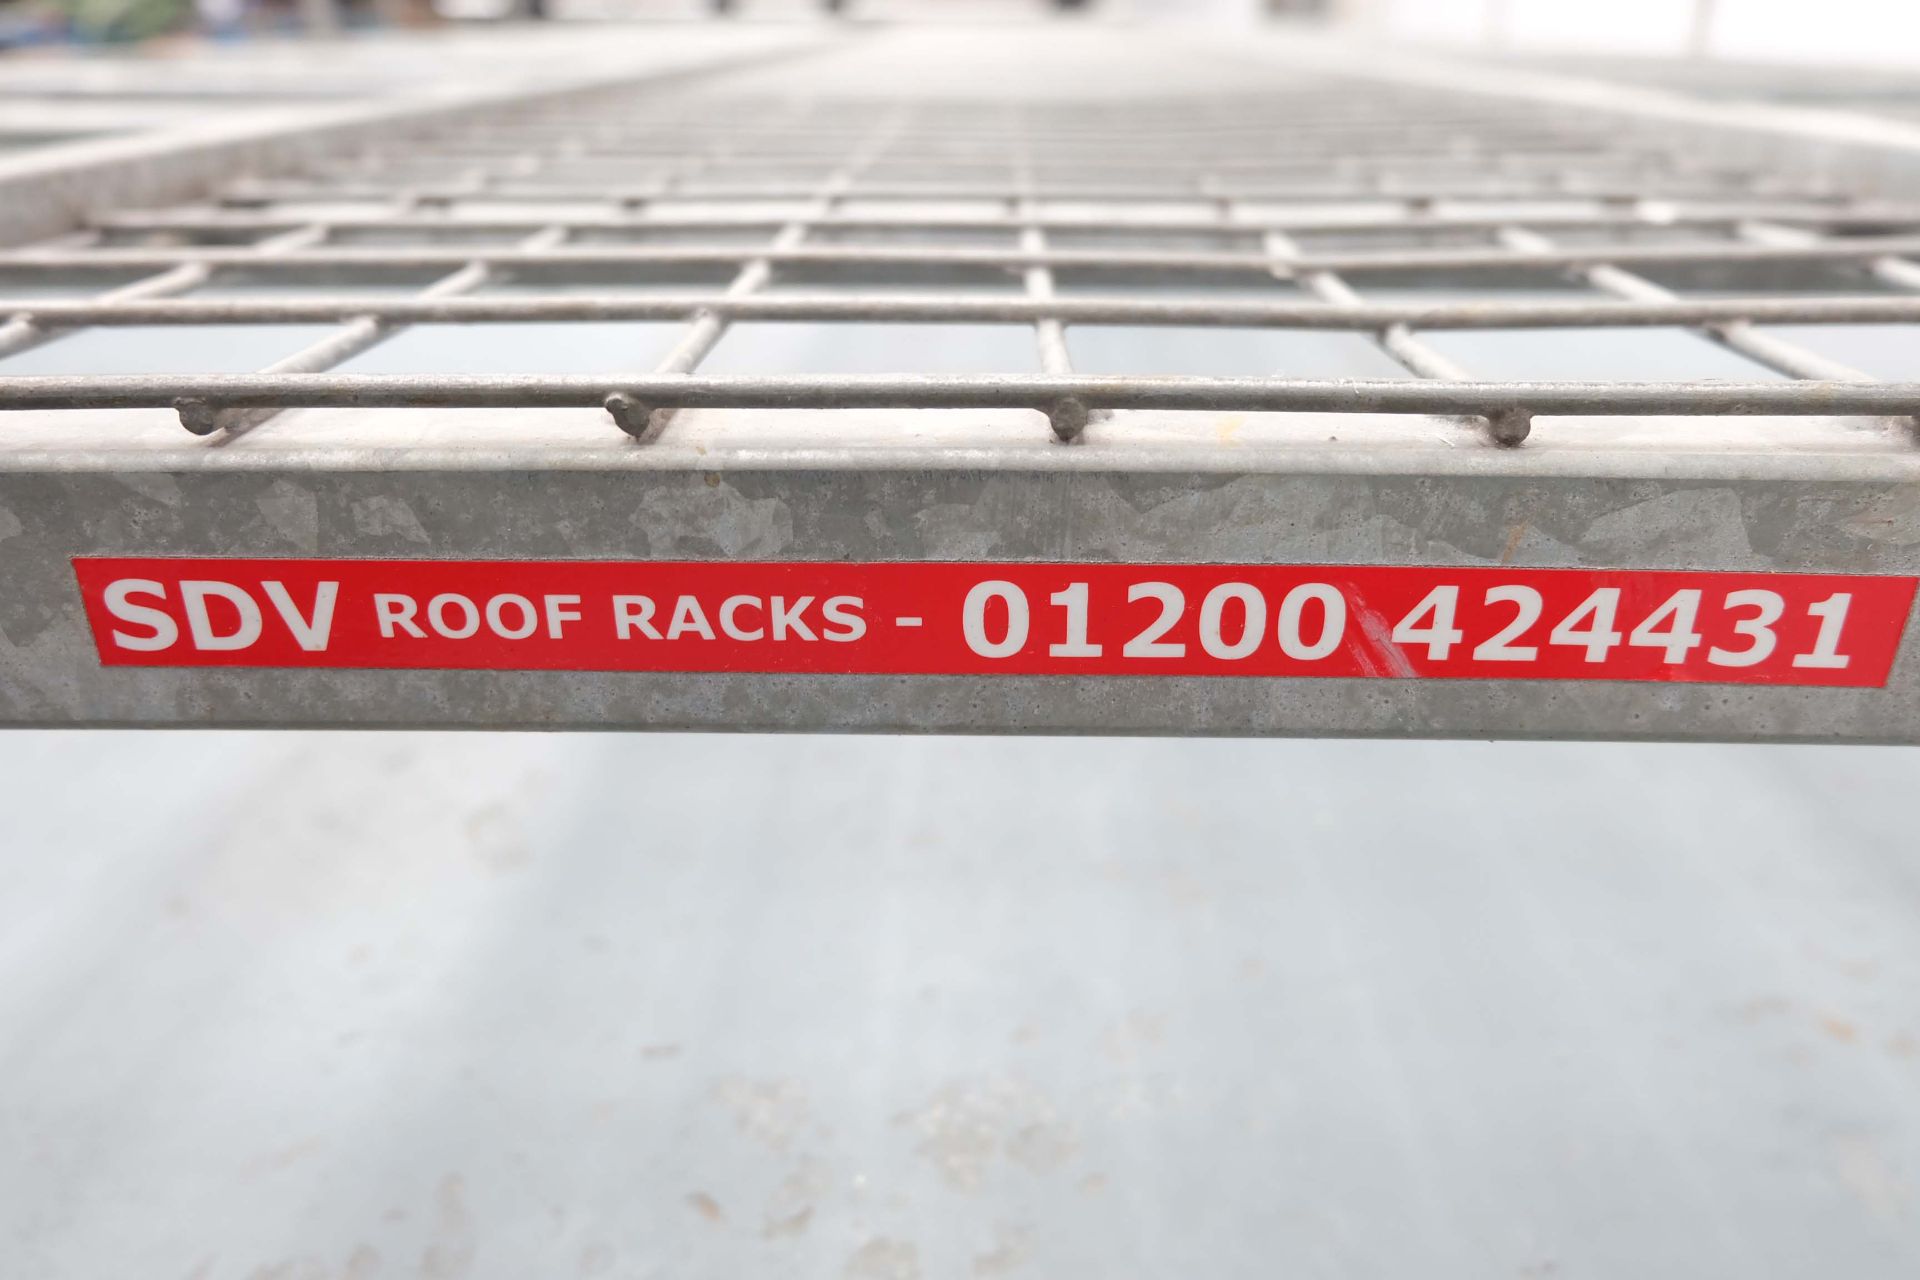 SDV Roof Rack Style 2 With Heavy Duty Runner Mesh. Made From Heavy Duty Galvanised Steel 140" x 68". - Image 6 of 6